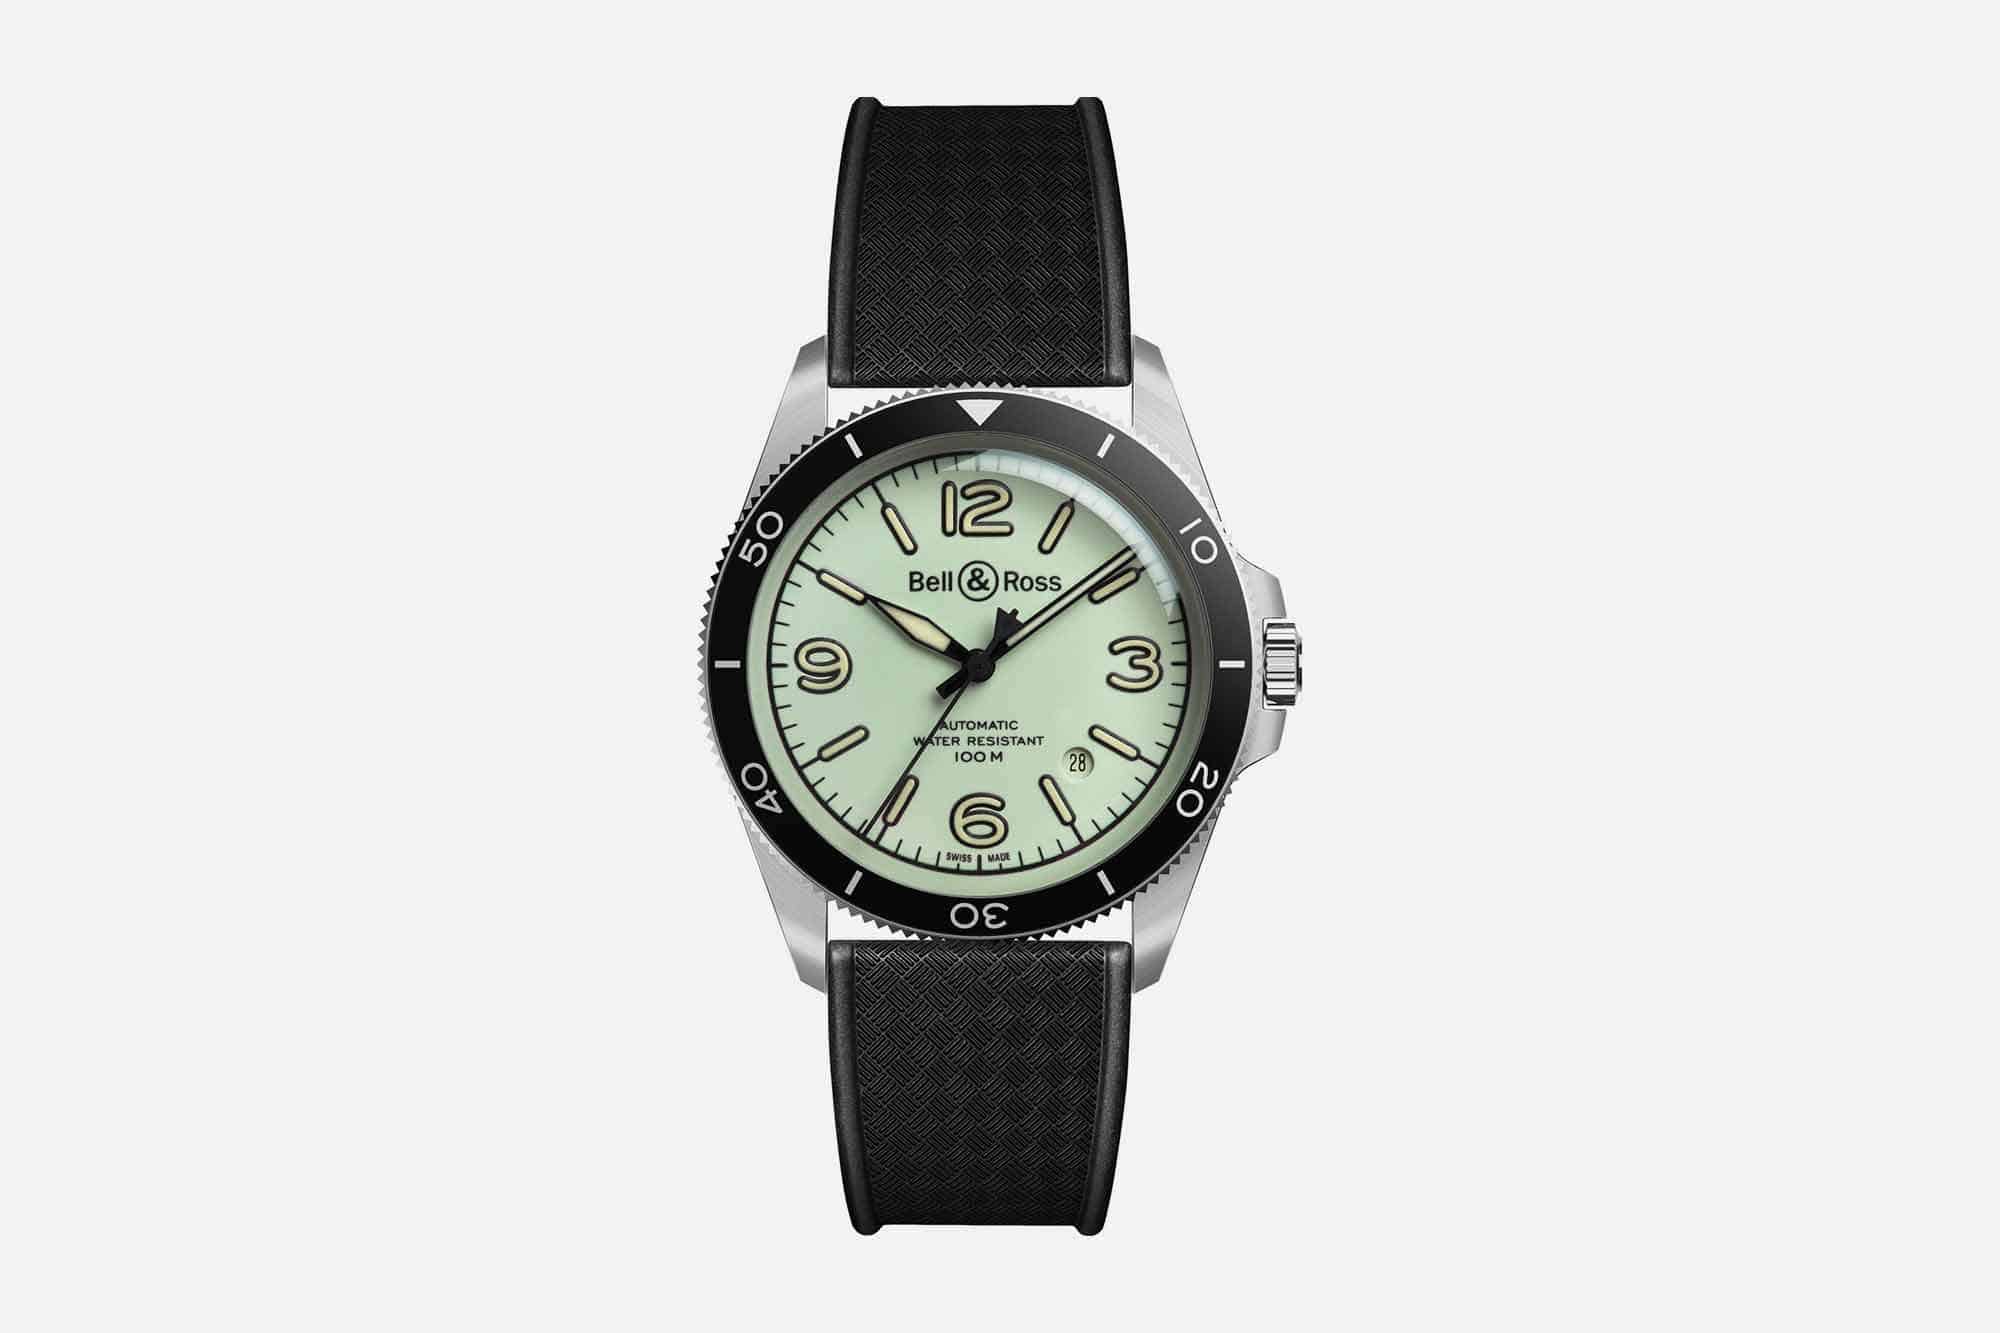 Bell & Ross Introduces Two New Summer Ready Limited Edition Pilot Watches